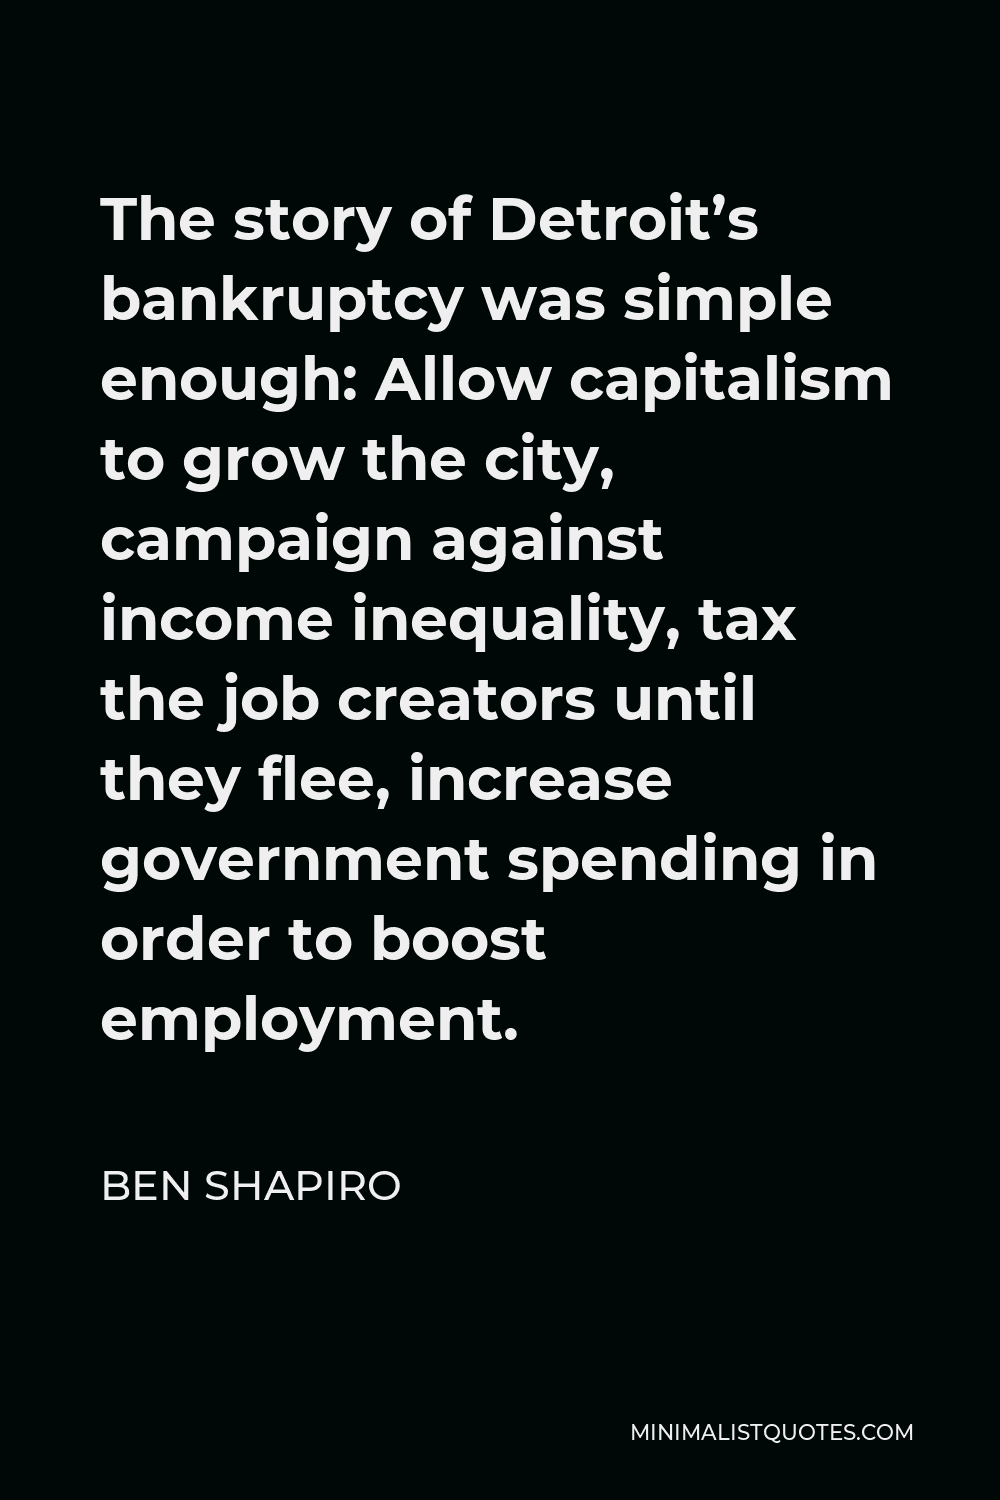 Ben Shapiro Quote - The story of Detroit’s bankruptcy was simple enough: Allow capitalism to grow the city, campaign against income inequality, tax the job creators until they flee, increase government spending in order to boost employment.